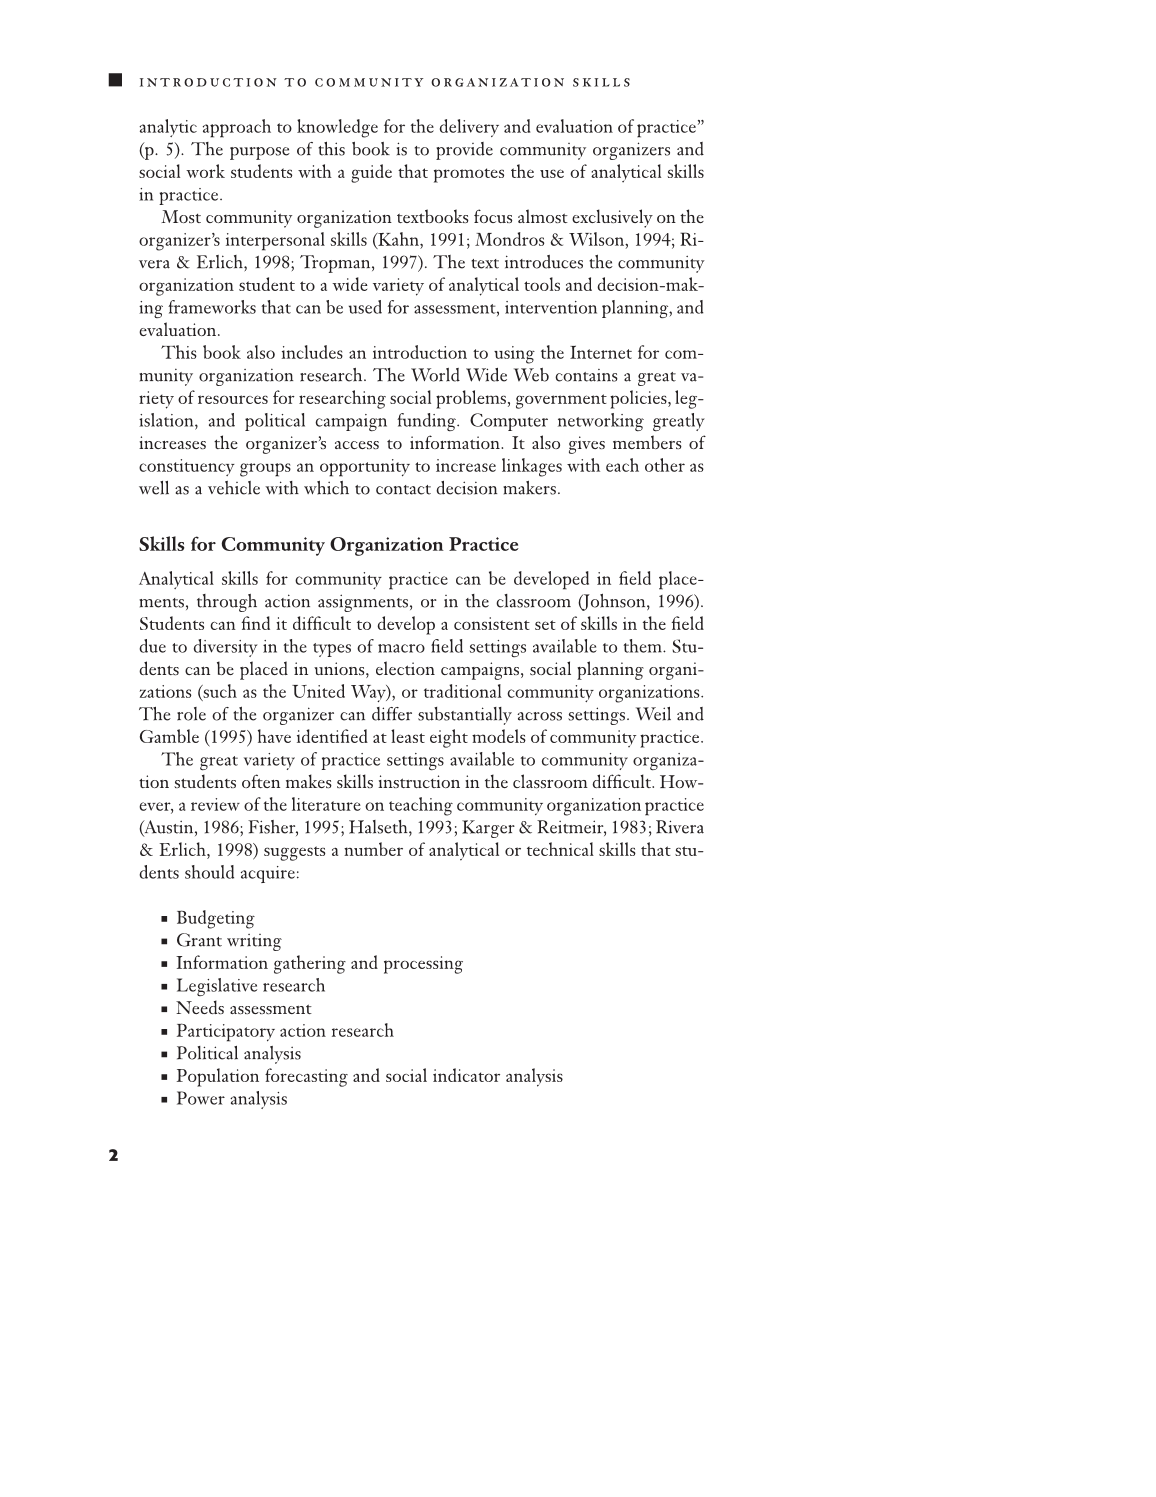 Analytical Skills for Community Organization Practice page 2